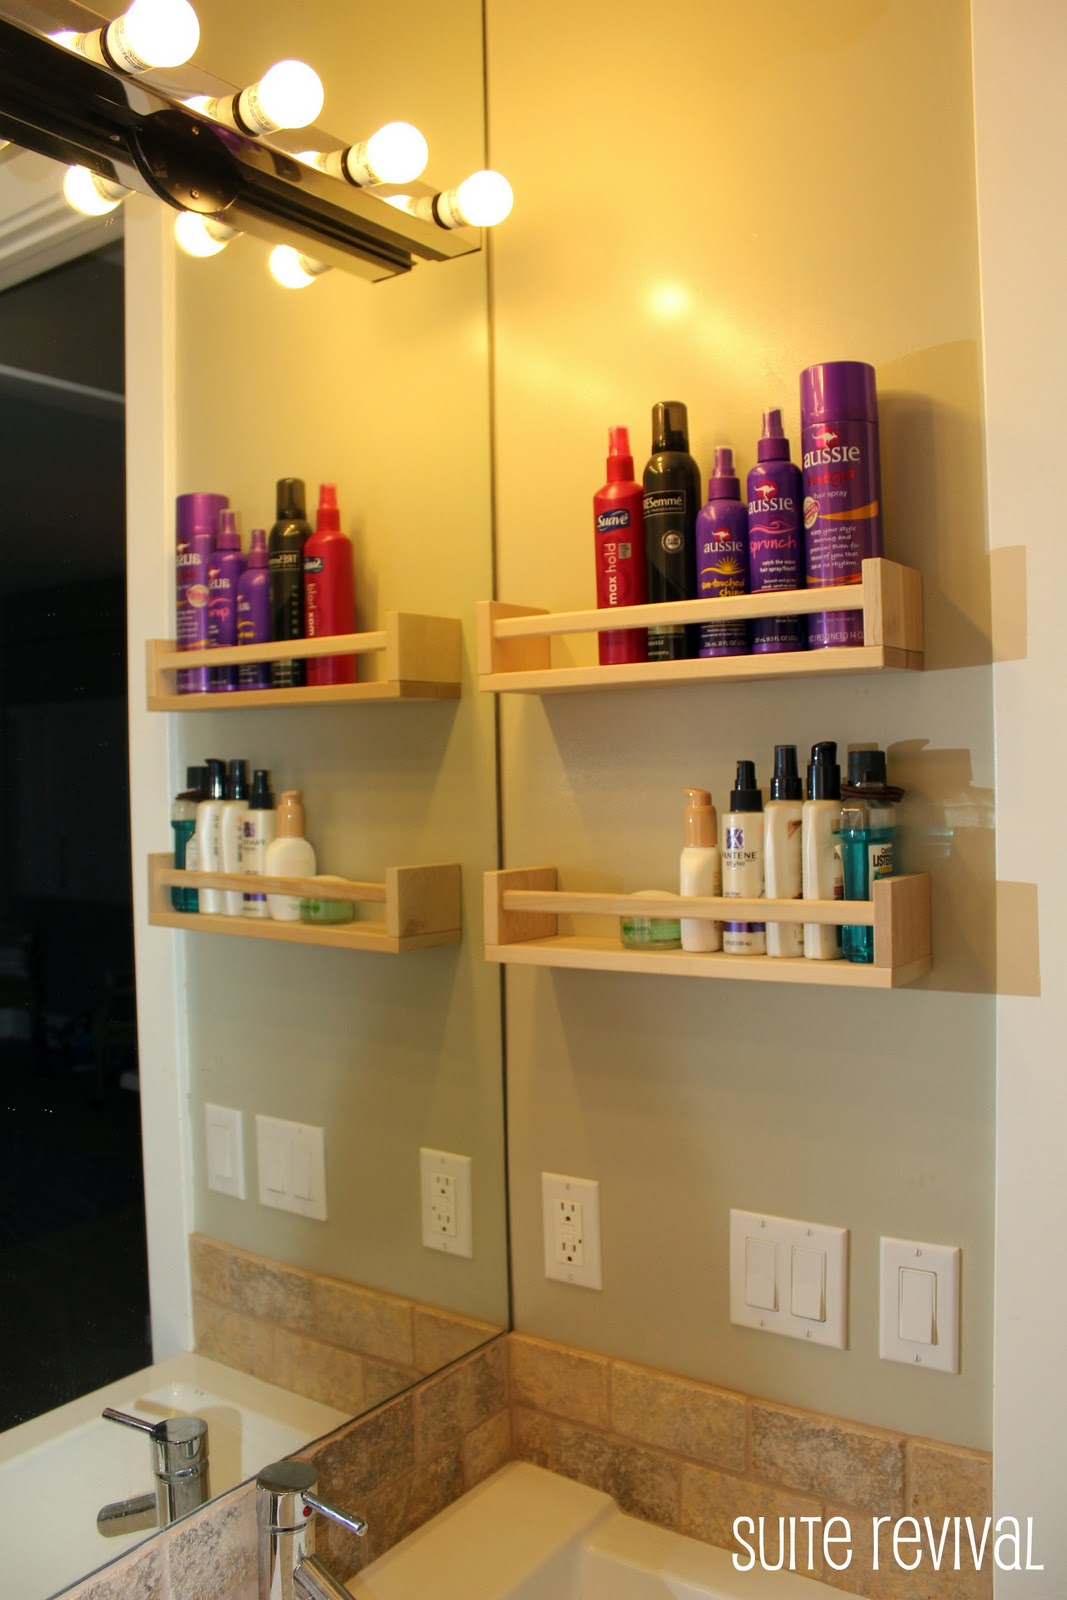 Take the spice racks into the bathroom and use them as storage for all of your hair styling and makeup products